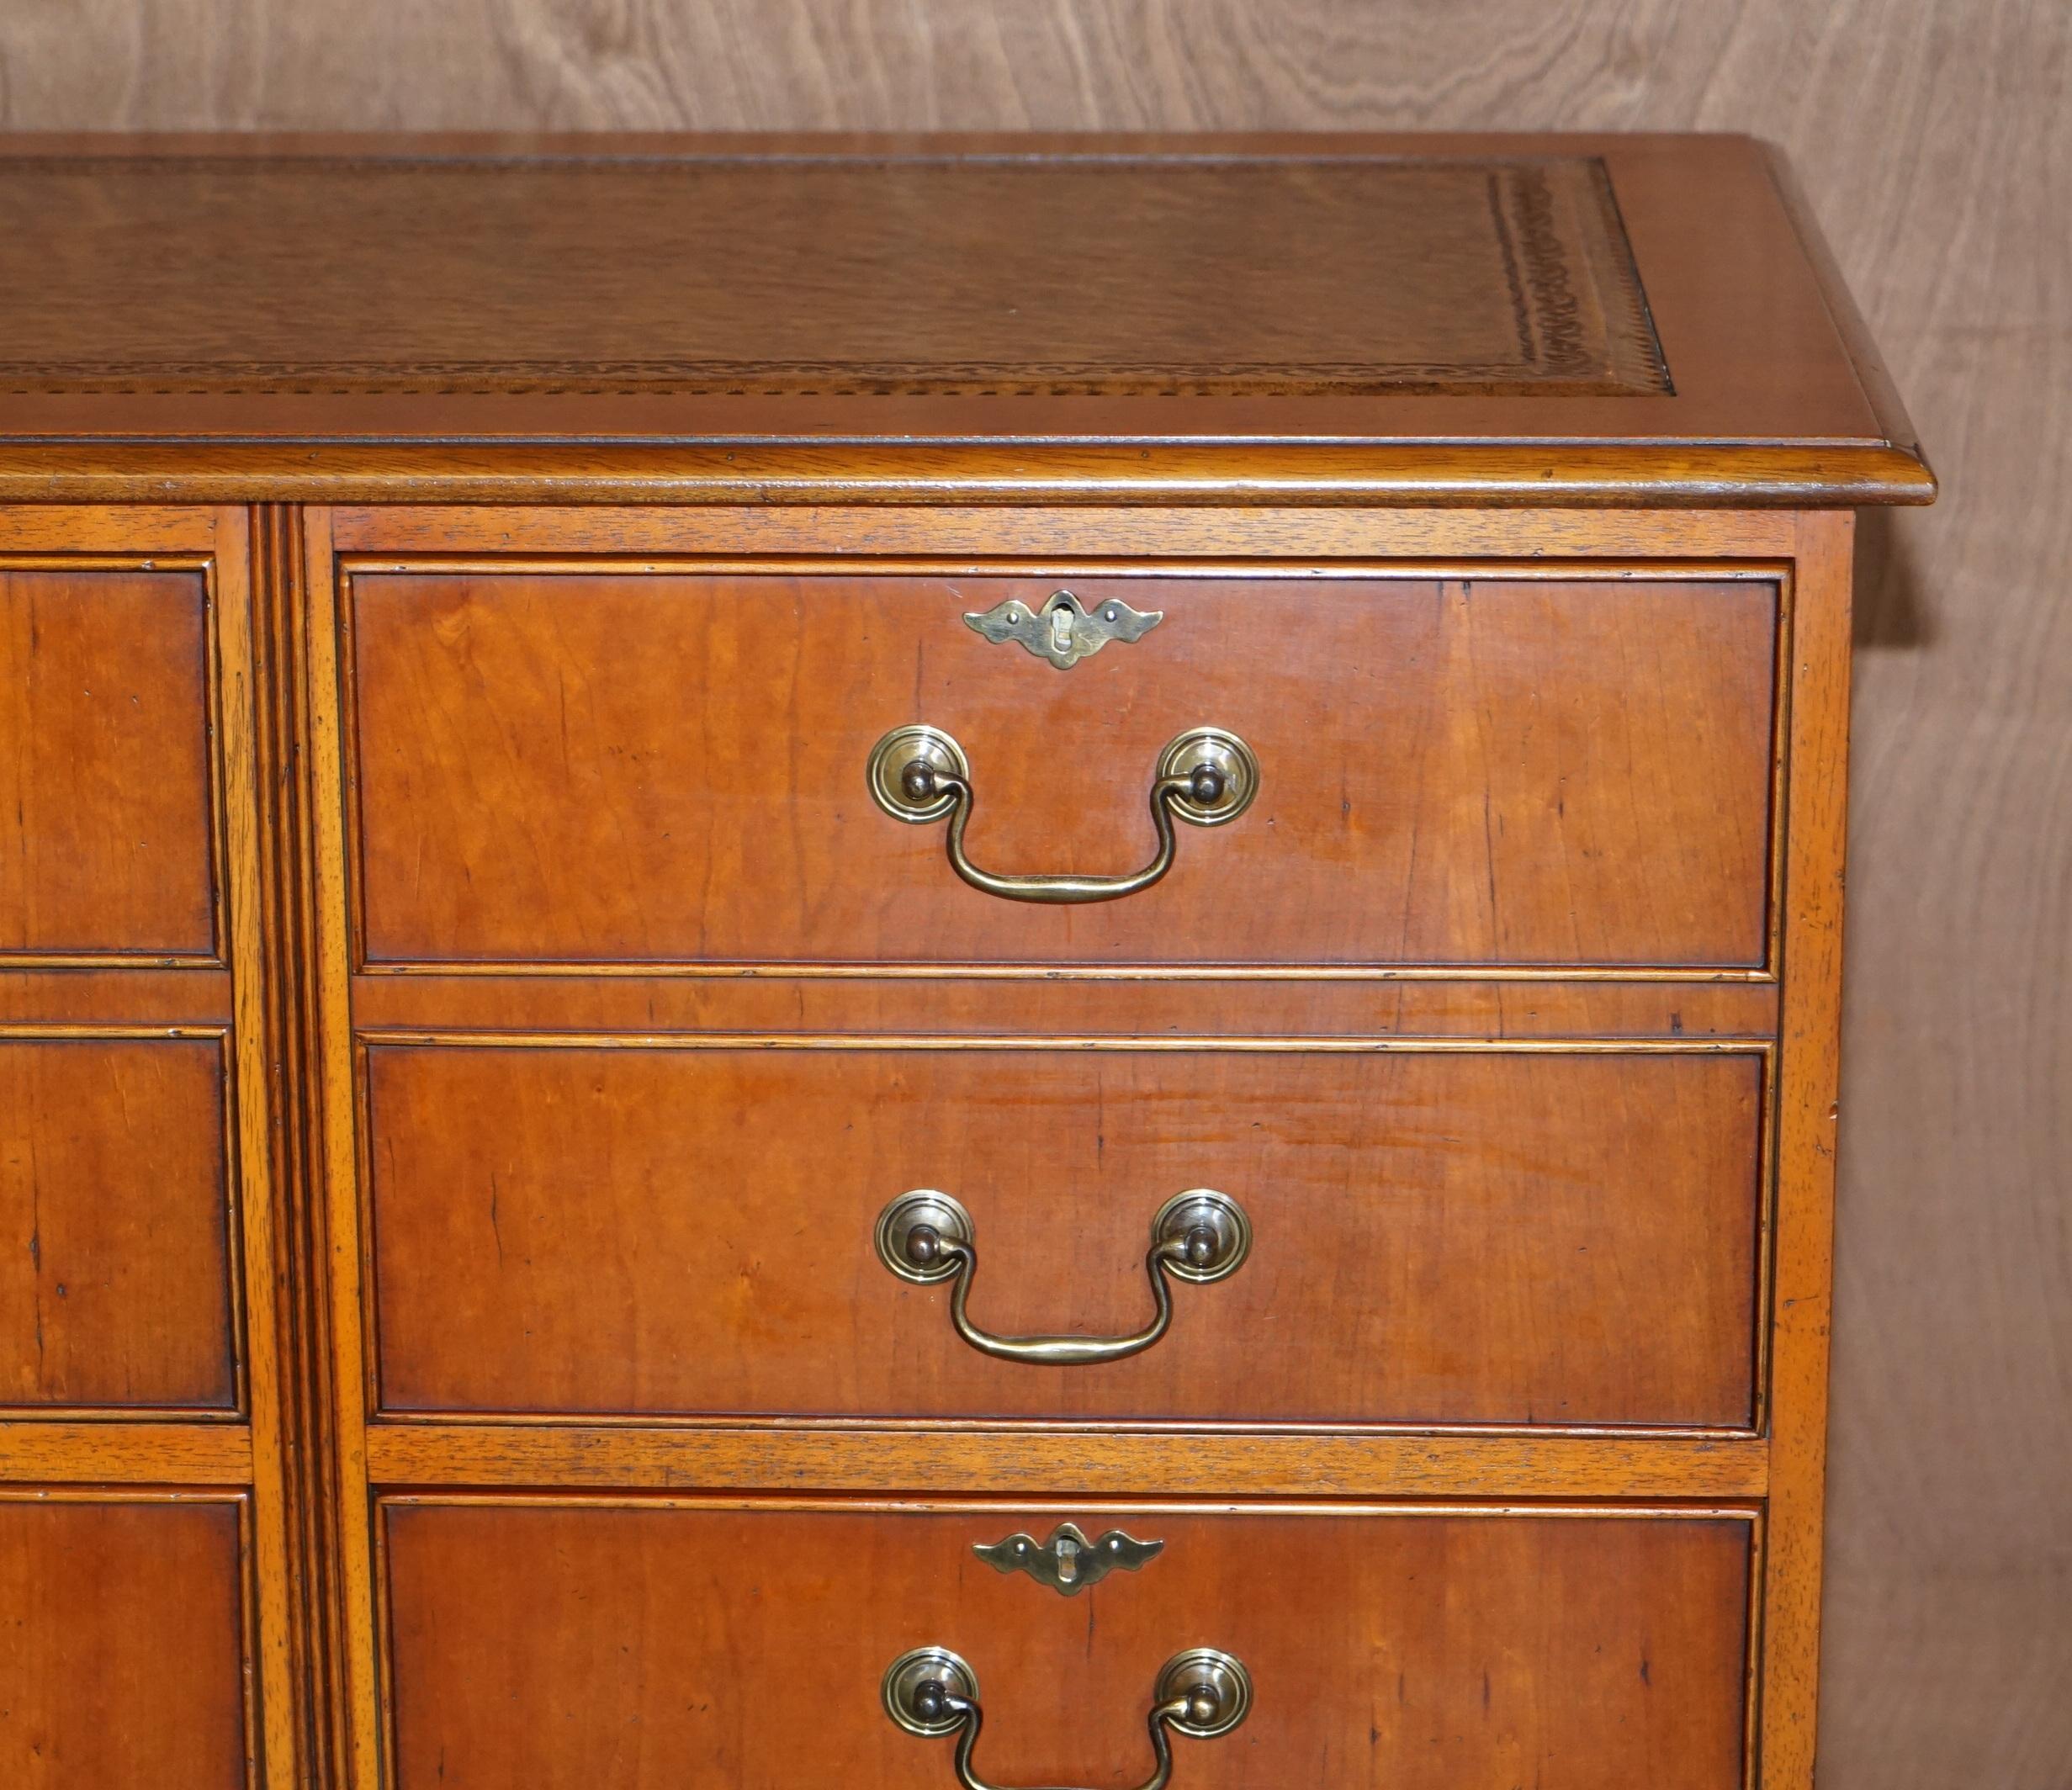 Hand-Crafted Stunning Yew Wood Brown Leather Double Filing Cabinet for at Home Office Study